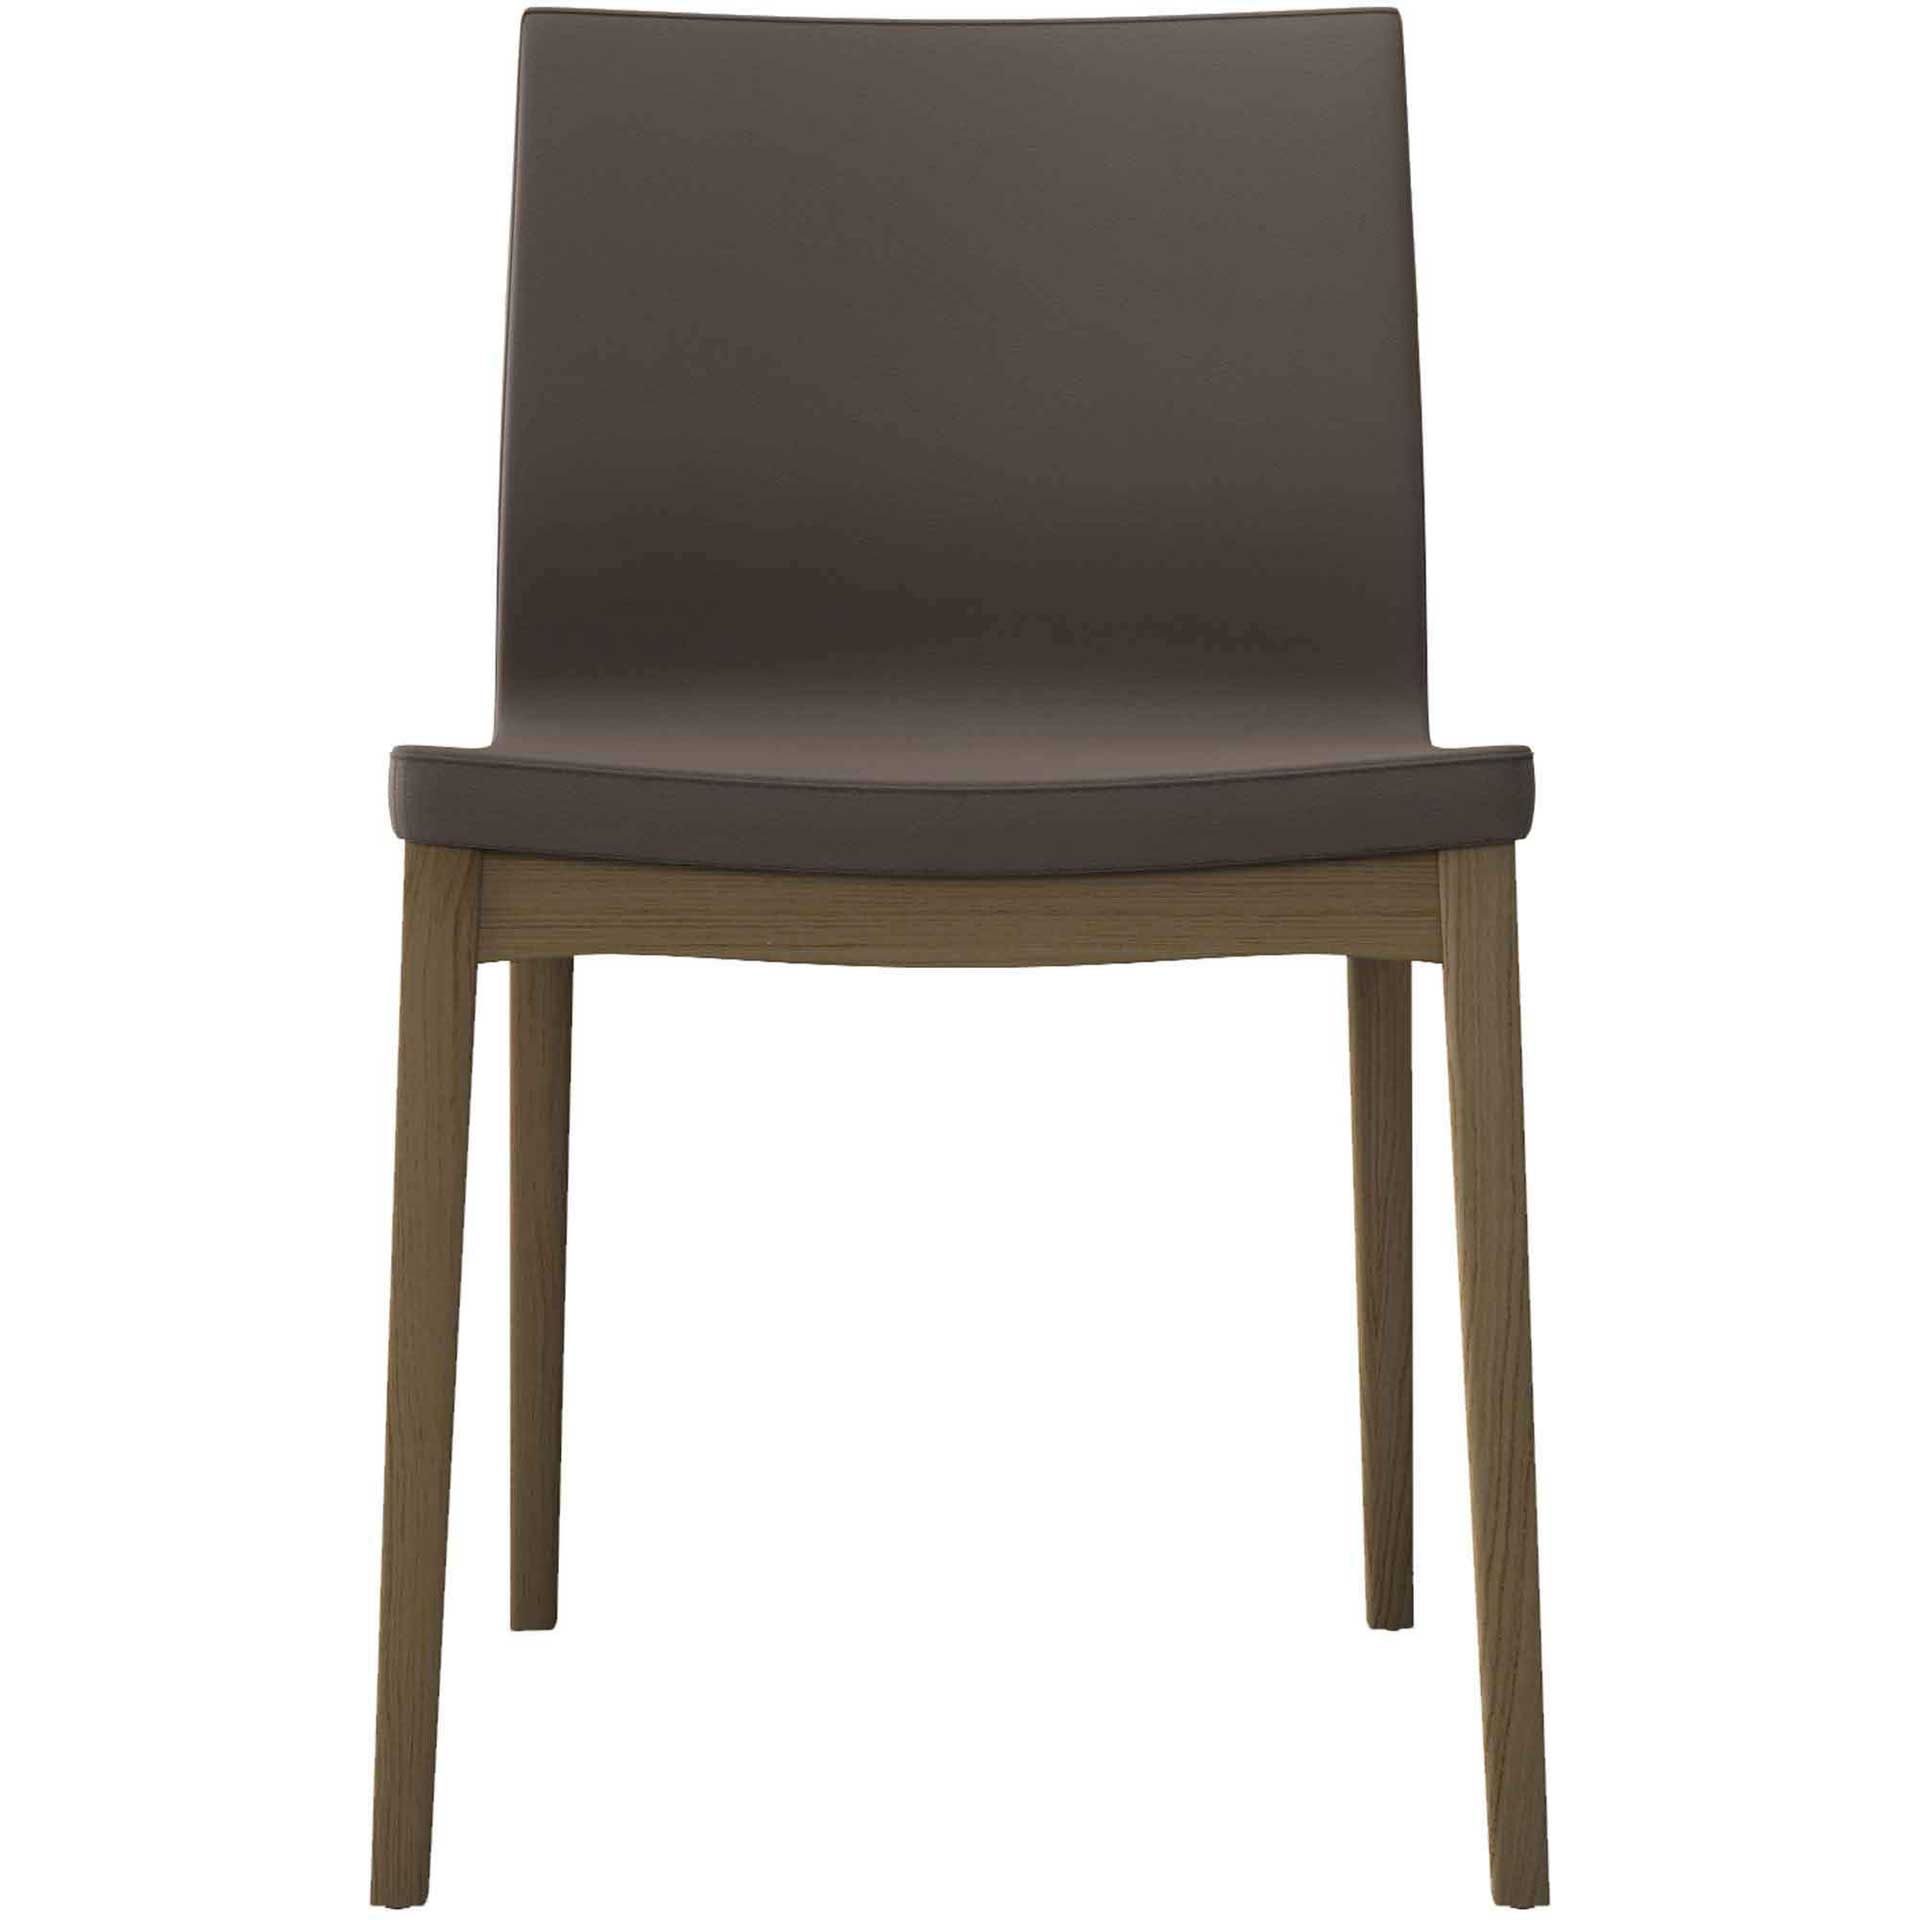 Enna Dining Chair Dove Gray/Natural Oak (Set of 2)